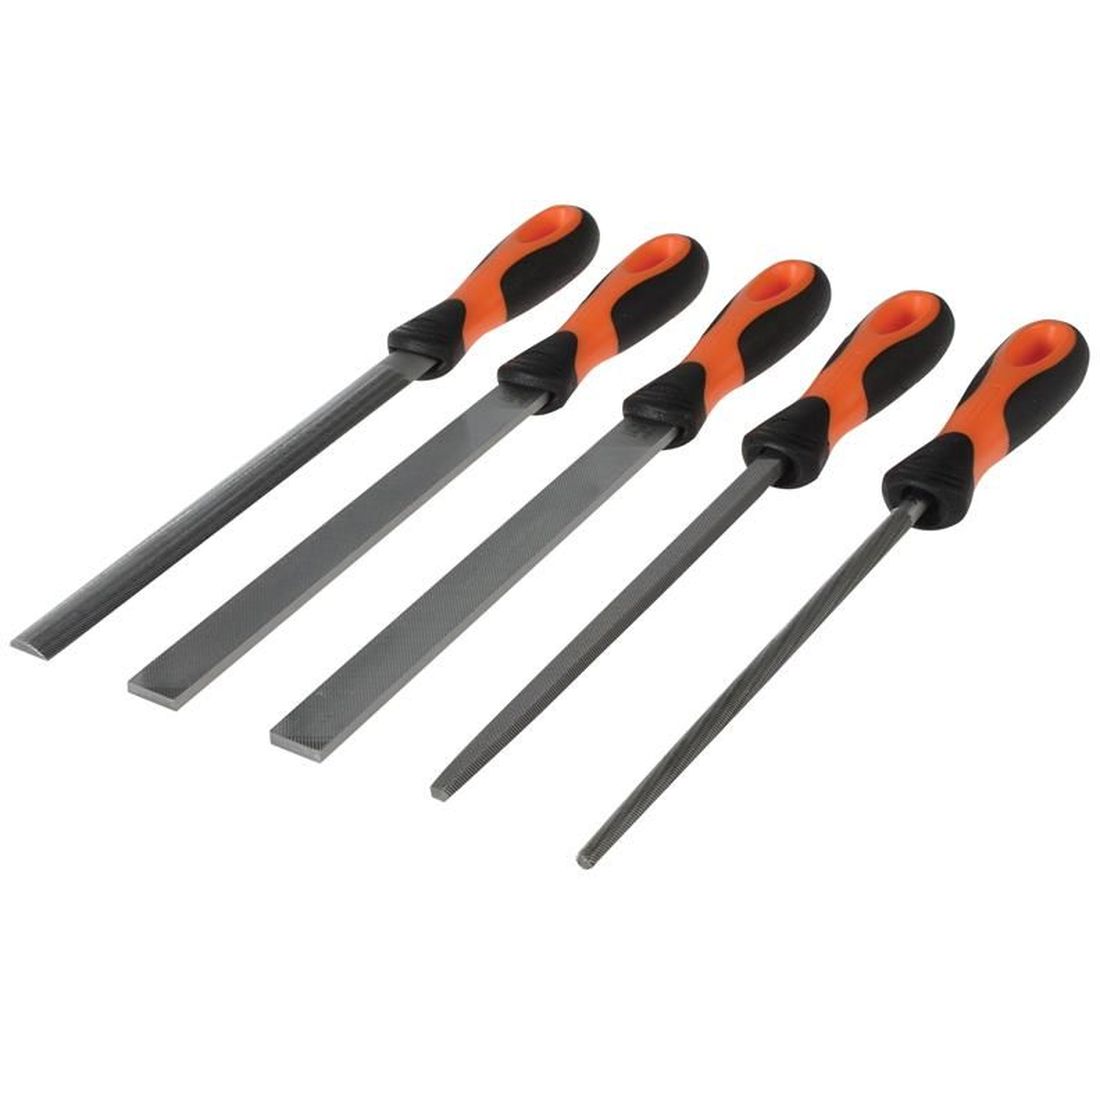 Bahco 200mm (8in) ERGO Engineering File Set, 5 Piece                                 